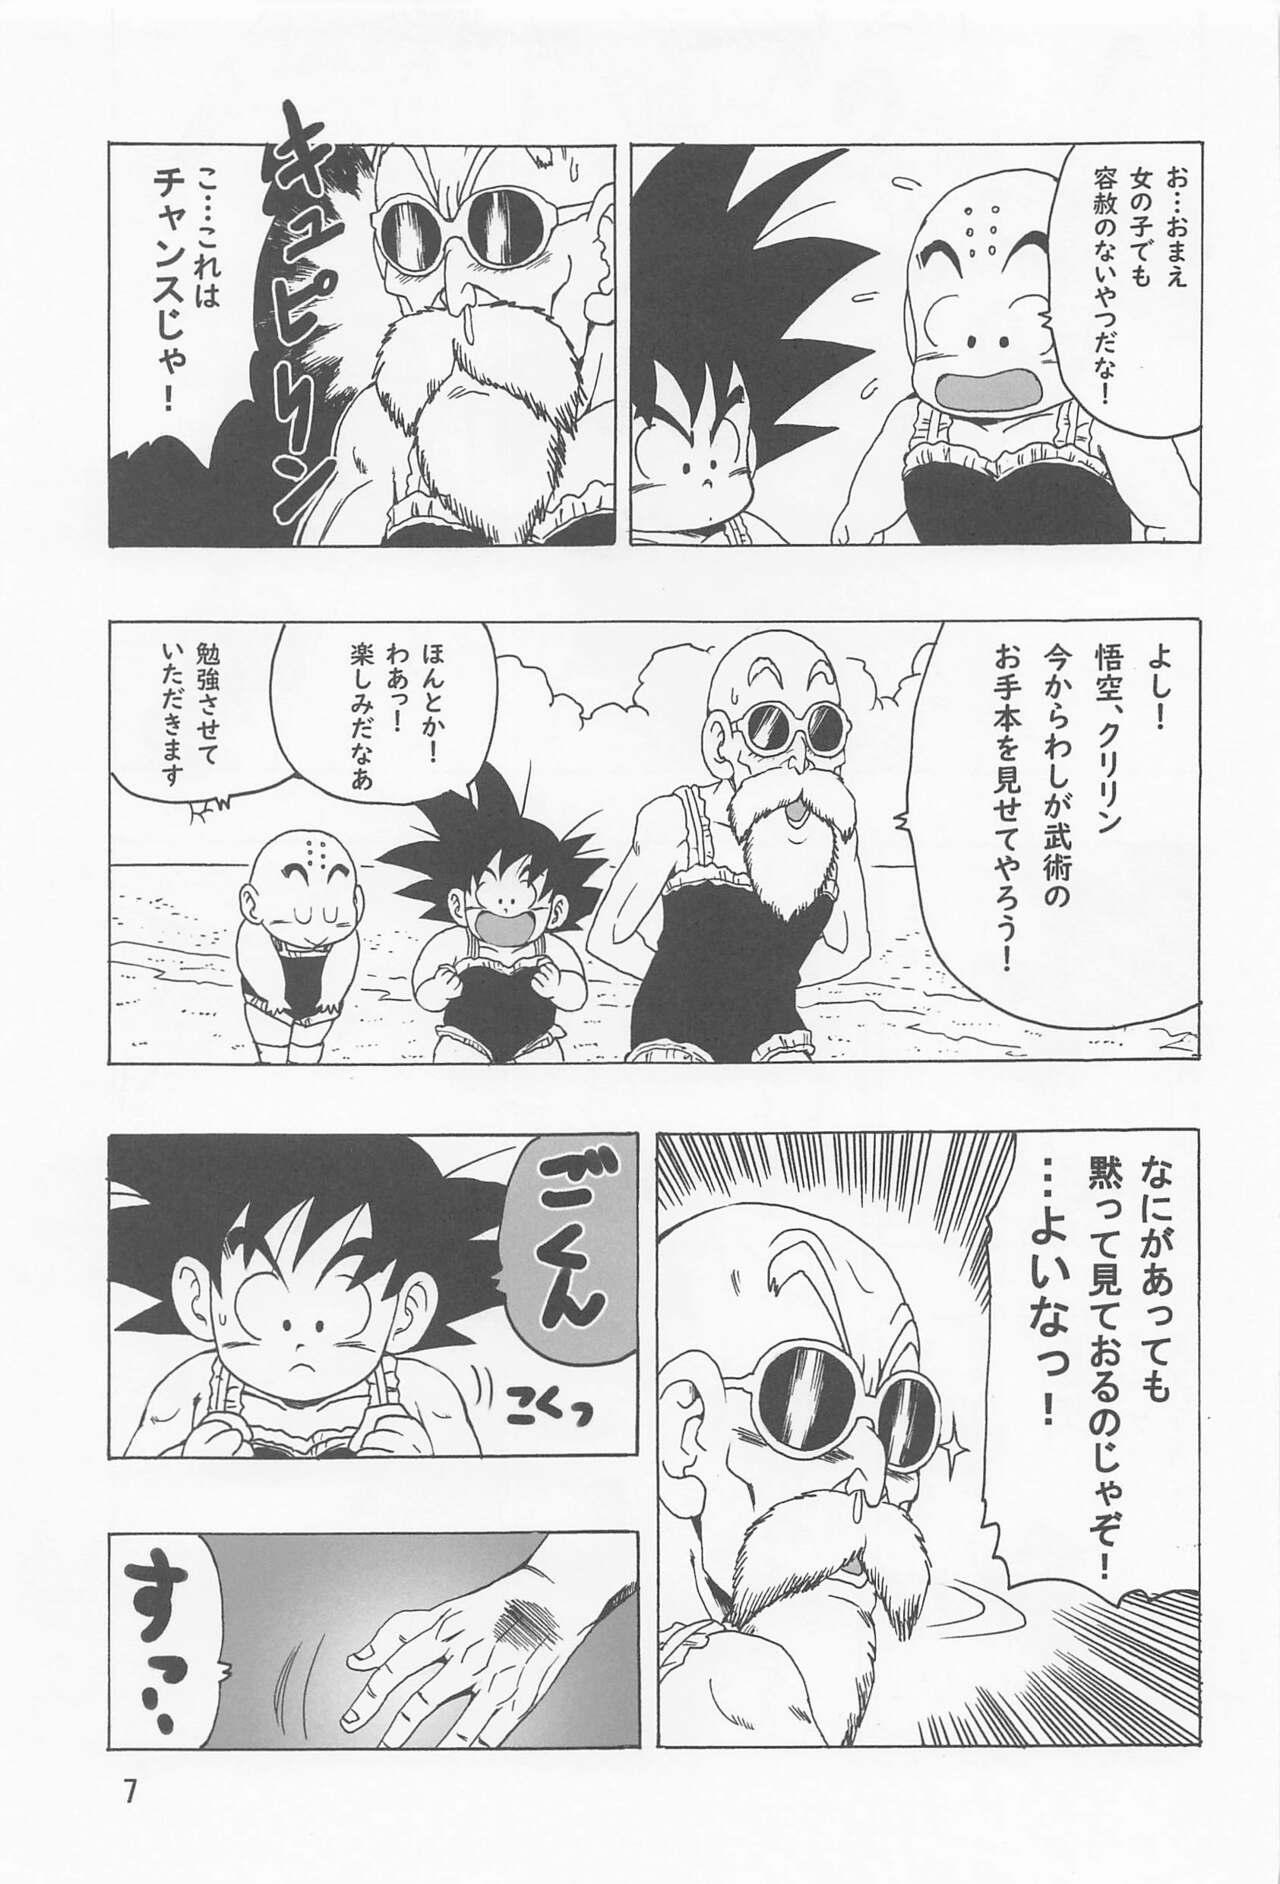 Hiddencam Episode of Lunch 1 - Dragon ball Nudes - Page 8